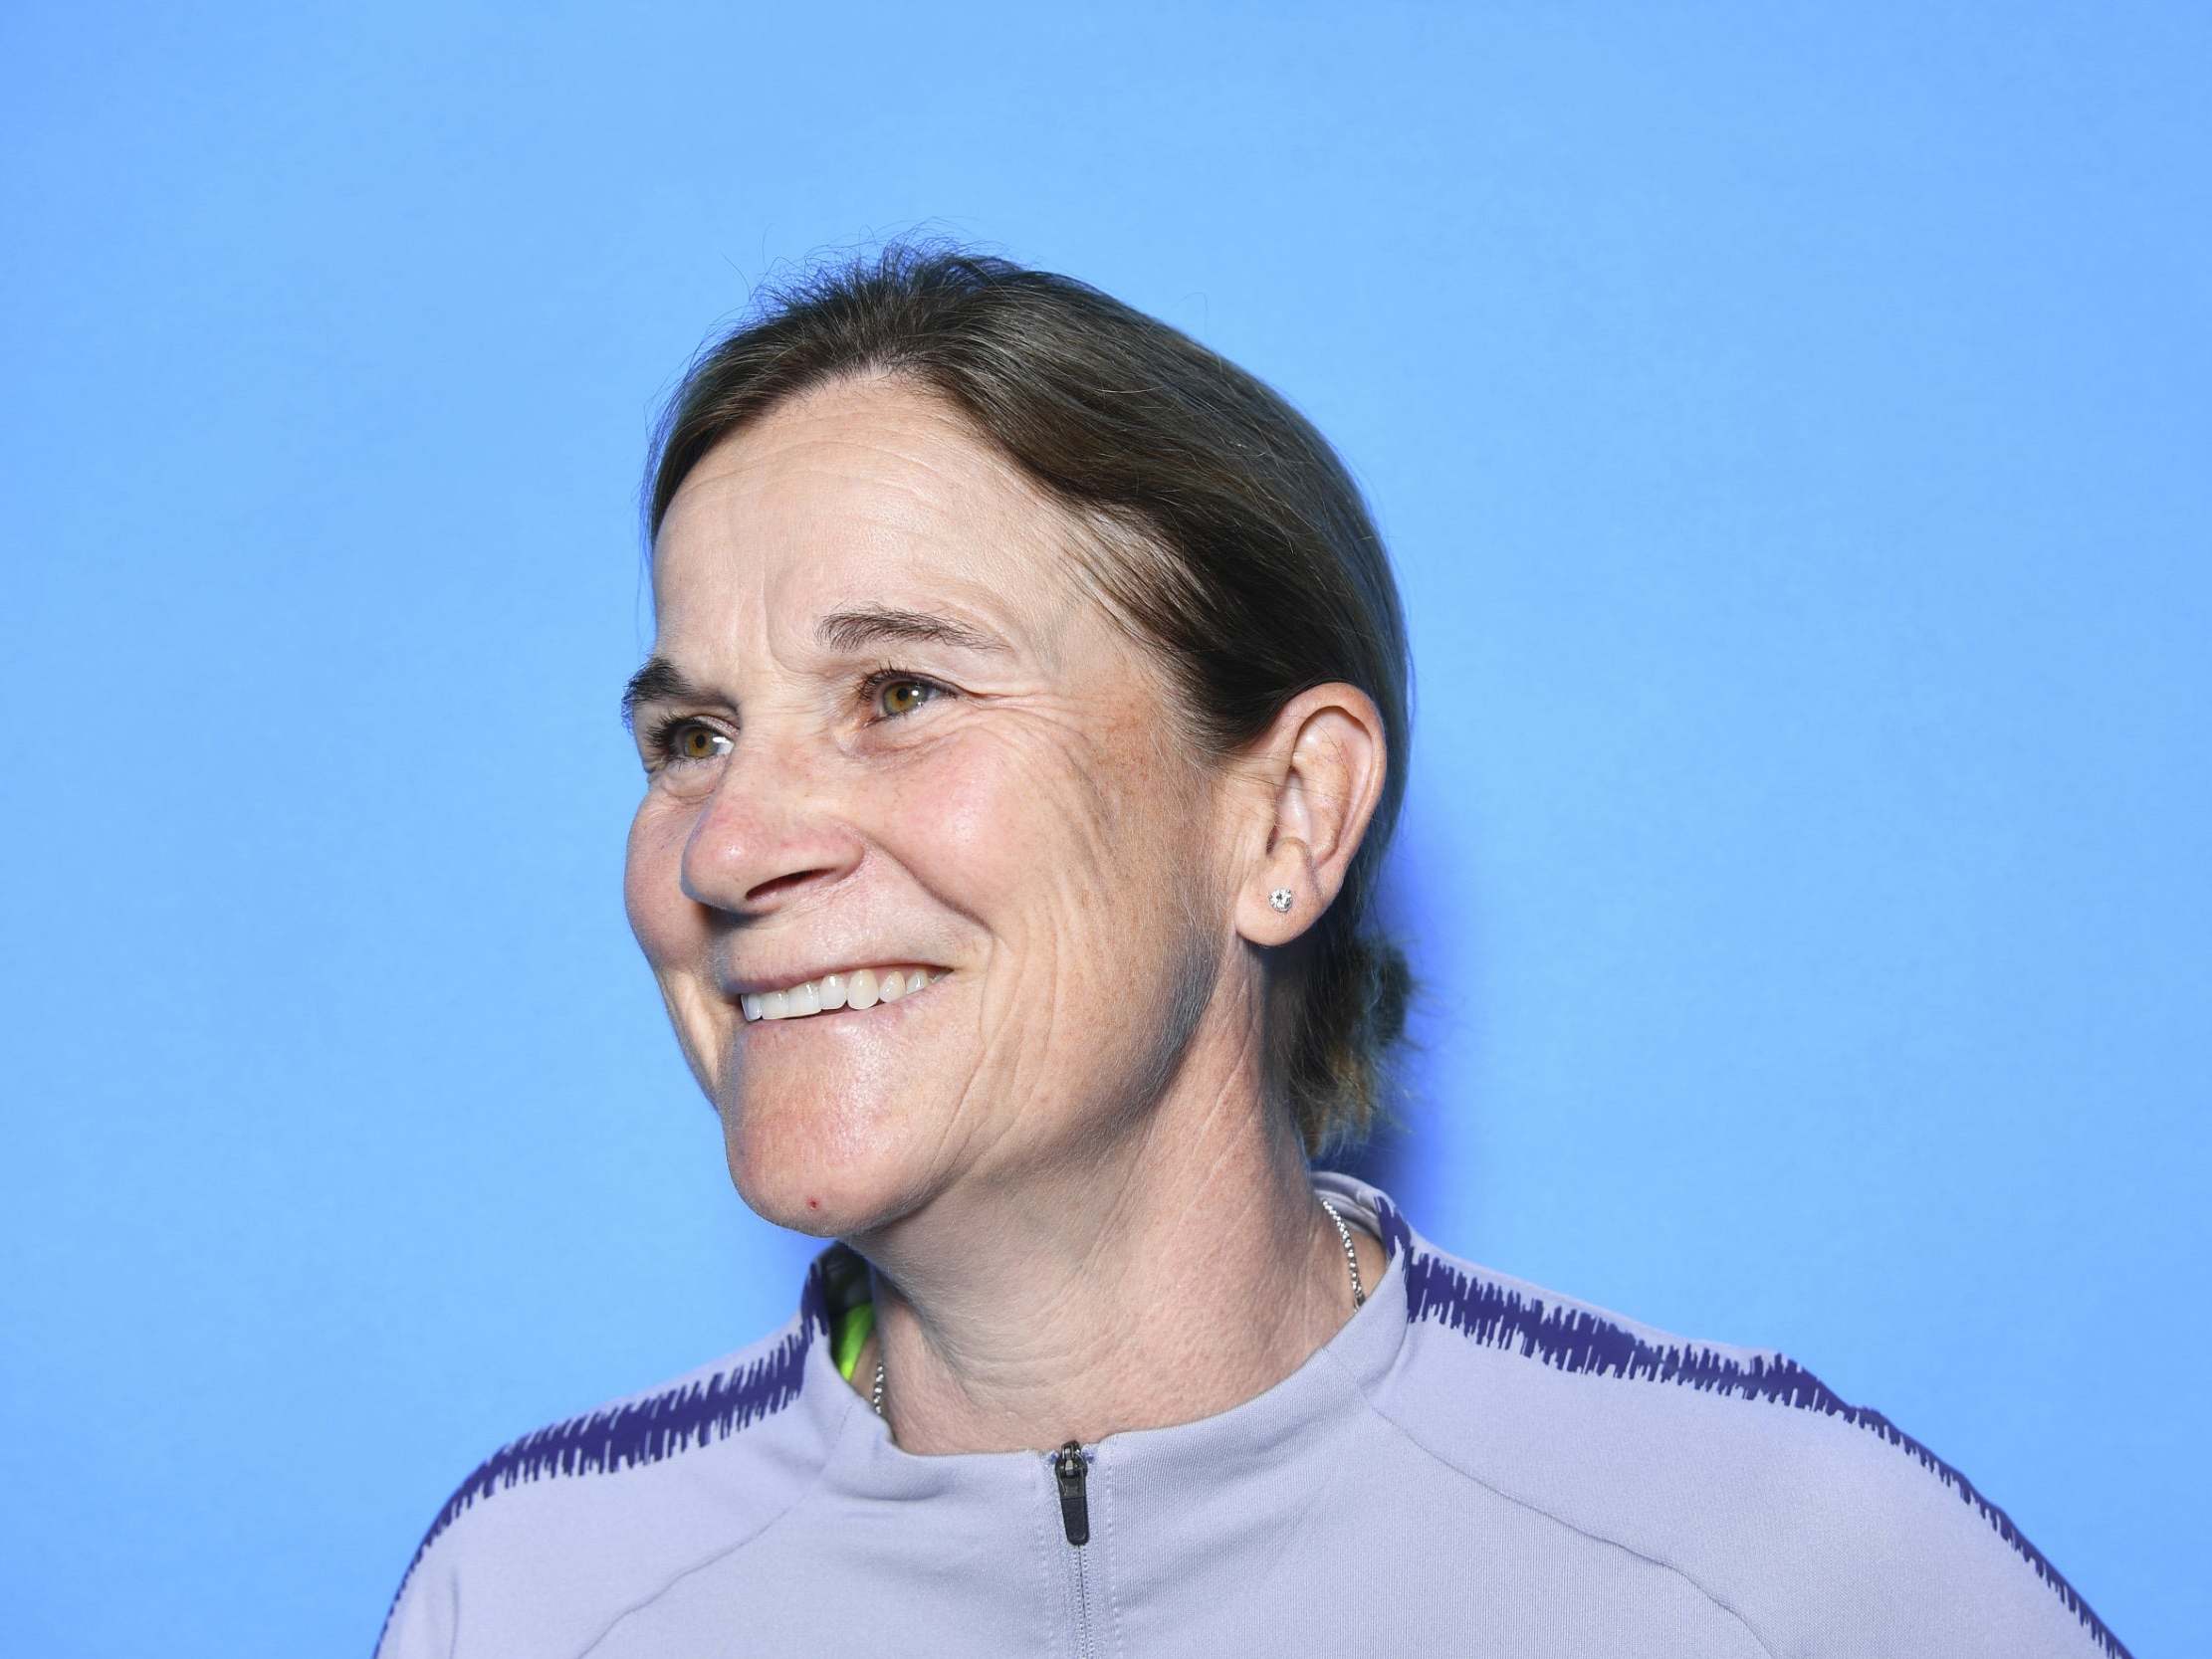 US Soccer says it owes a debt of gratitude for the impact Jill Ellis has had on the sport